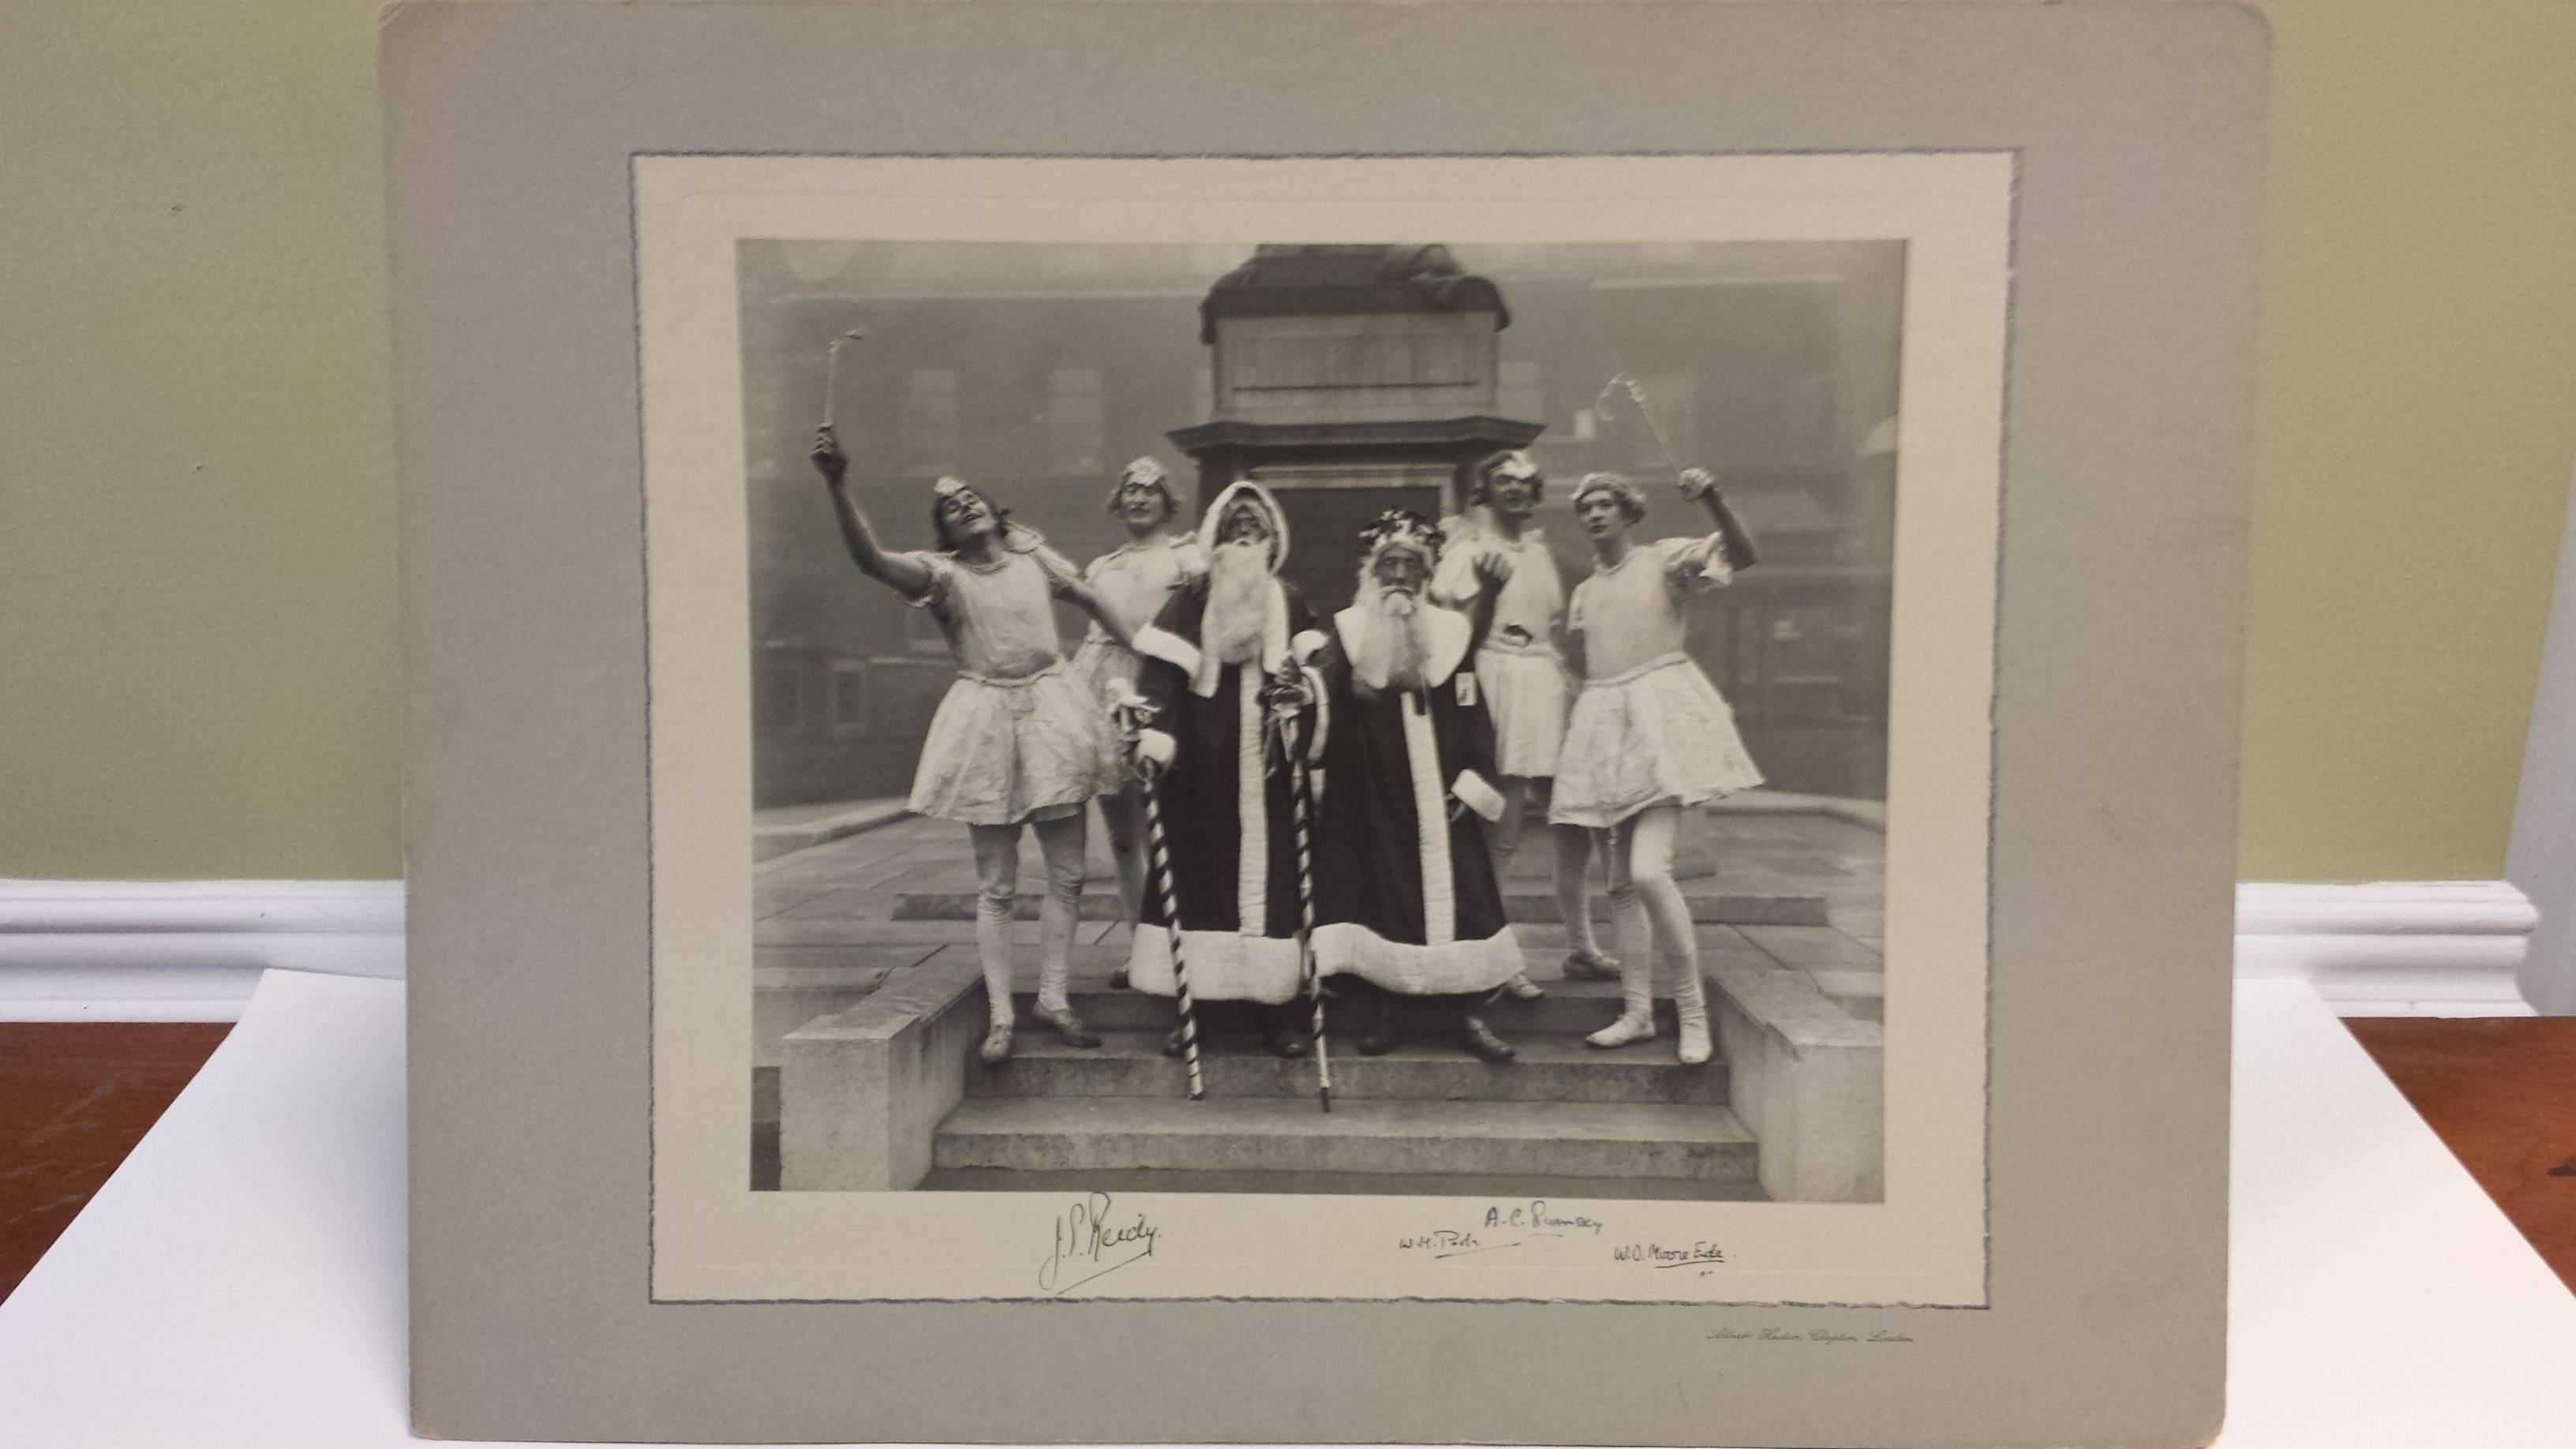 Albert Hester Photograph Christmas 1933 Clapton London, London Hospital Residents Band, Photograph is of Residents in Costume, Fairy's & 2-Santa's, Printed Stamp on border and signed in pen by 4- members, Photo has no fading or damage. The photo